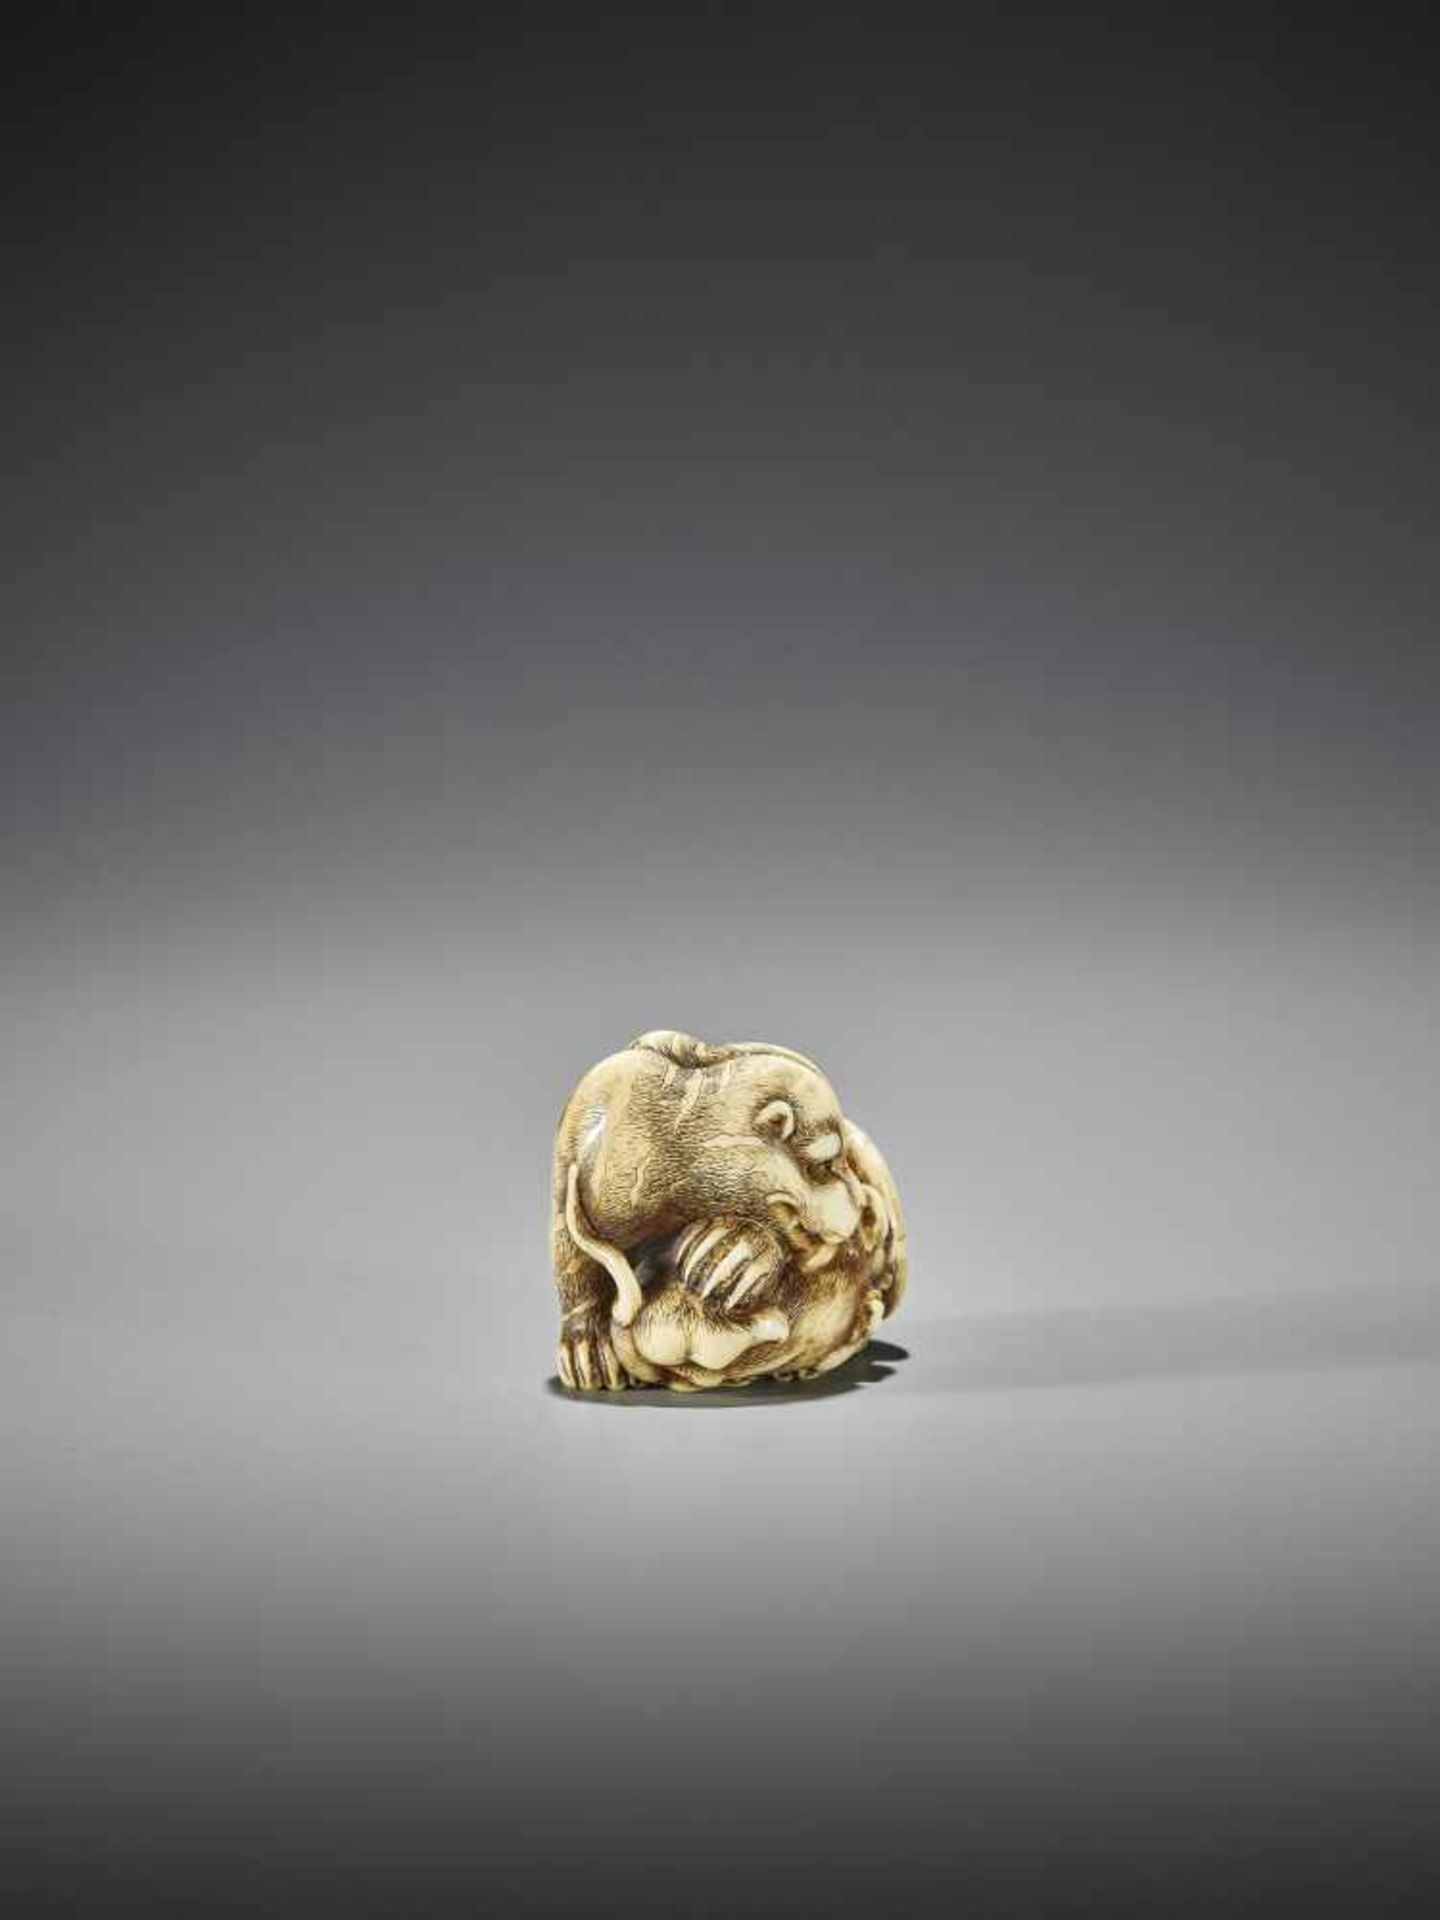 UNSHO HAKURYU I: AN EXCEPTIONAL IVORY NETSUKE OF A TIGER WITH CUB - Image 7 of 10